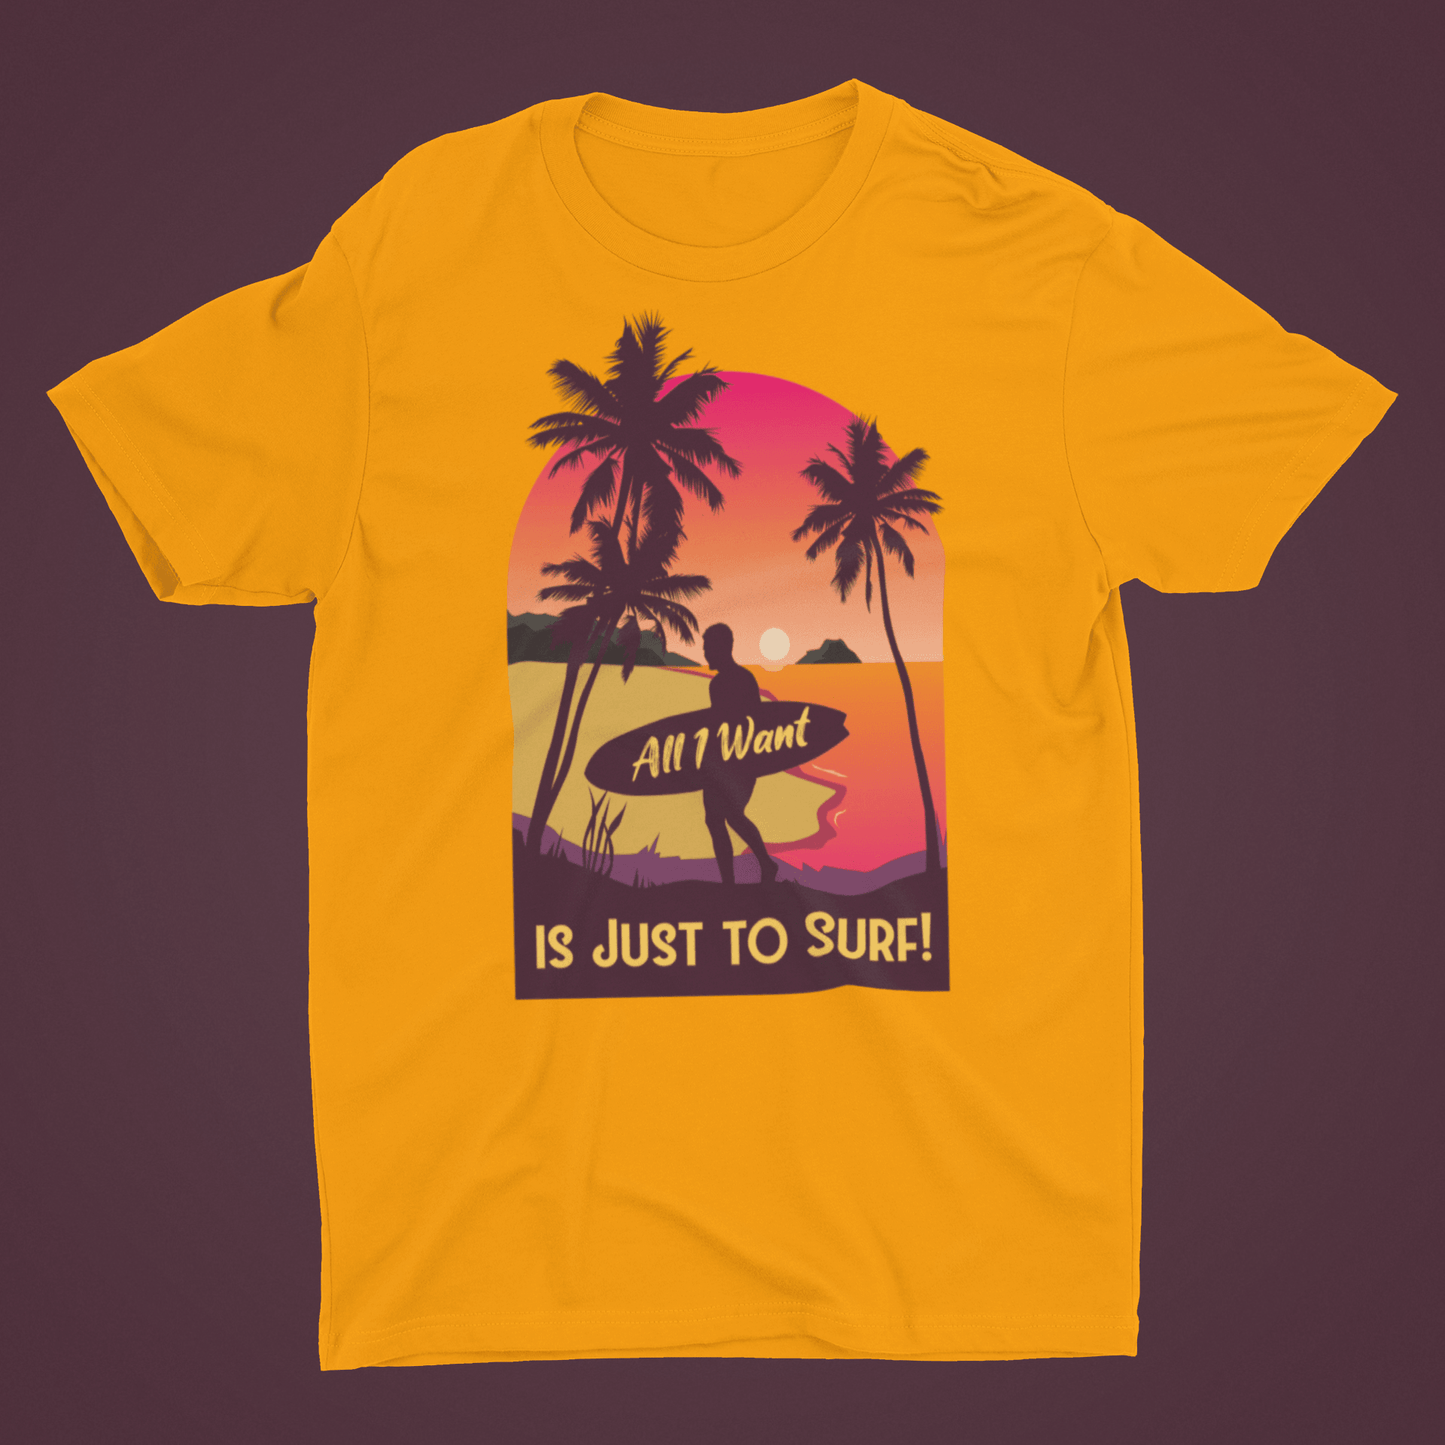 All I Want Is Just To Surf Mustard Yellow T-Shirt For Men - ATOM